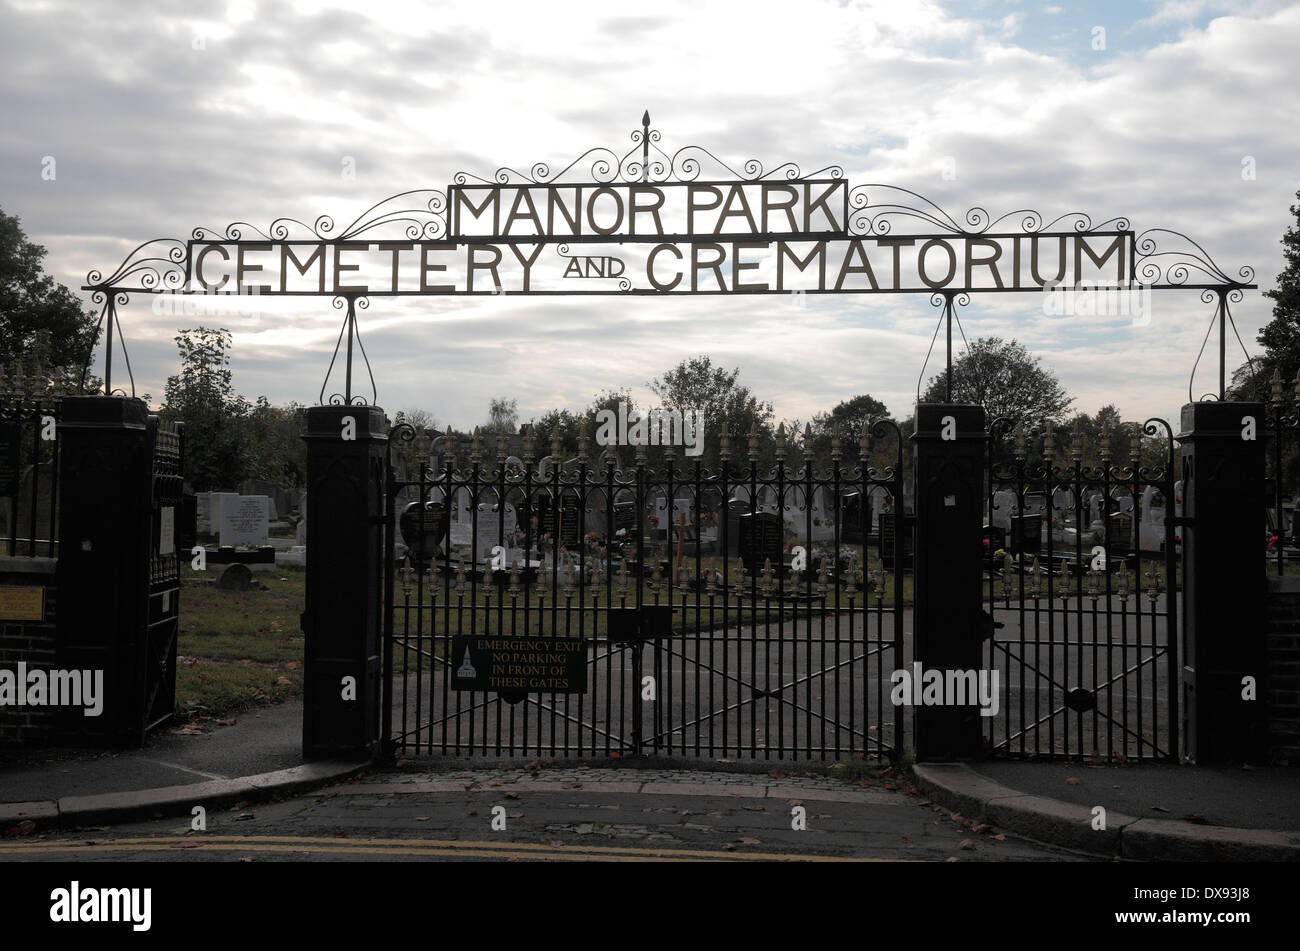 Entrance to Manor Park Cemetery & Crematorium in East London, burial location of Annie Chapman, Jack the Ripper's second victim. Stock Photo